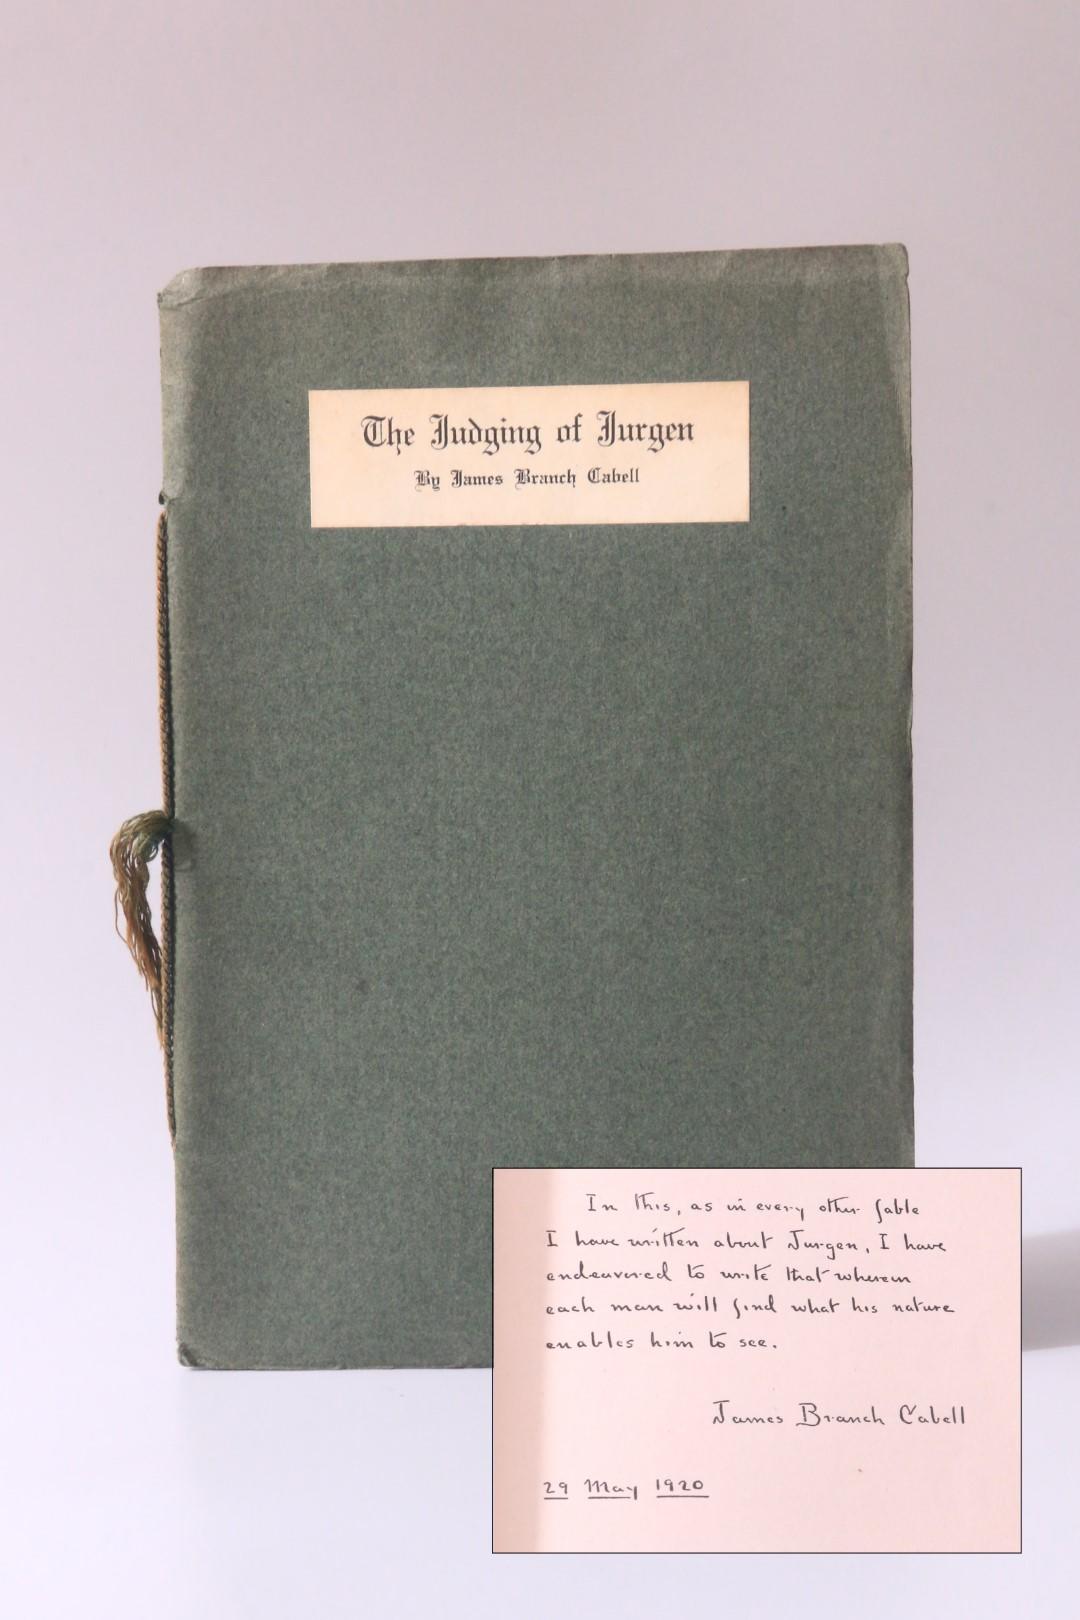 James Branch Cabell - The Judging of Jurgen - The Bookfellows, 1920, Signed First Edition.